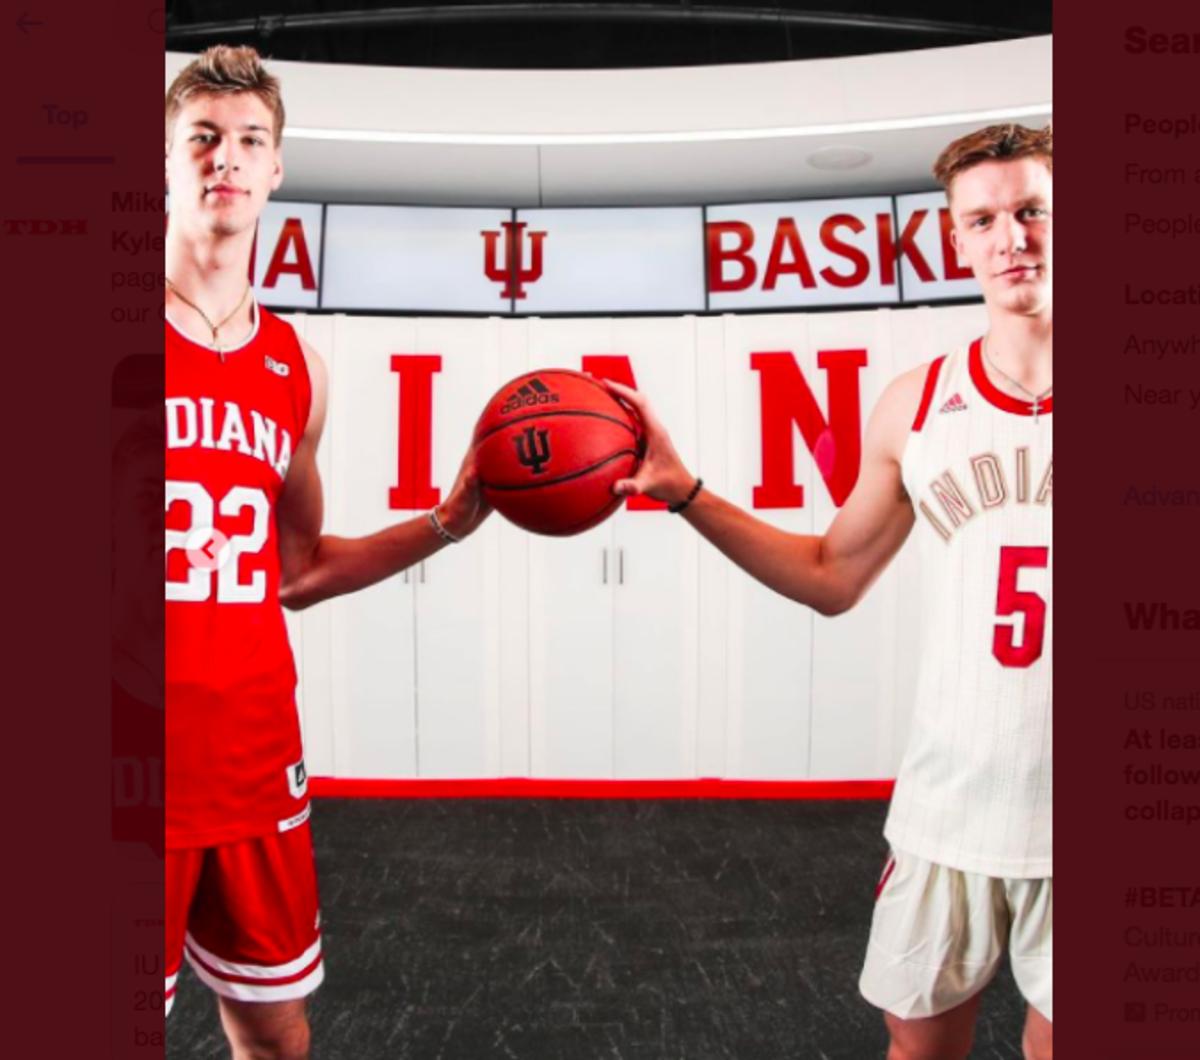 Kyle Filipowski and Justin Taylor took official visits to Indiana together just two weeks ago. (Instagram photo)